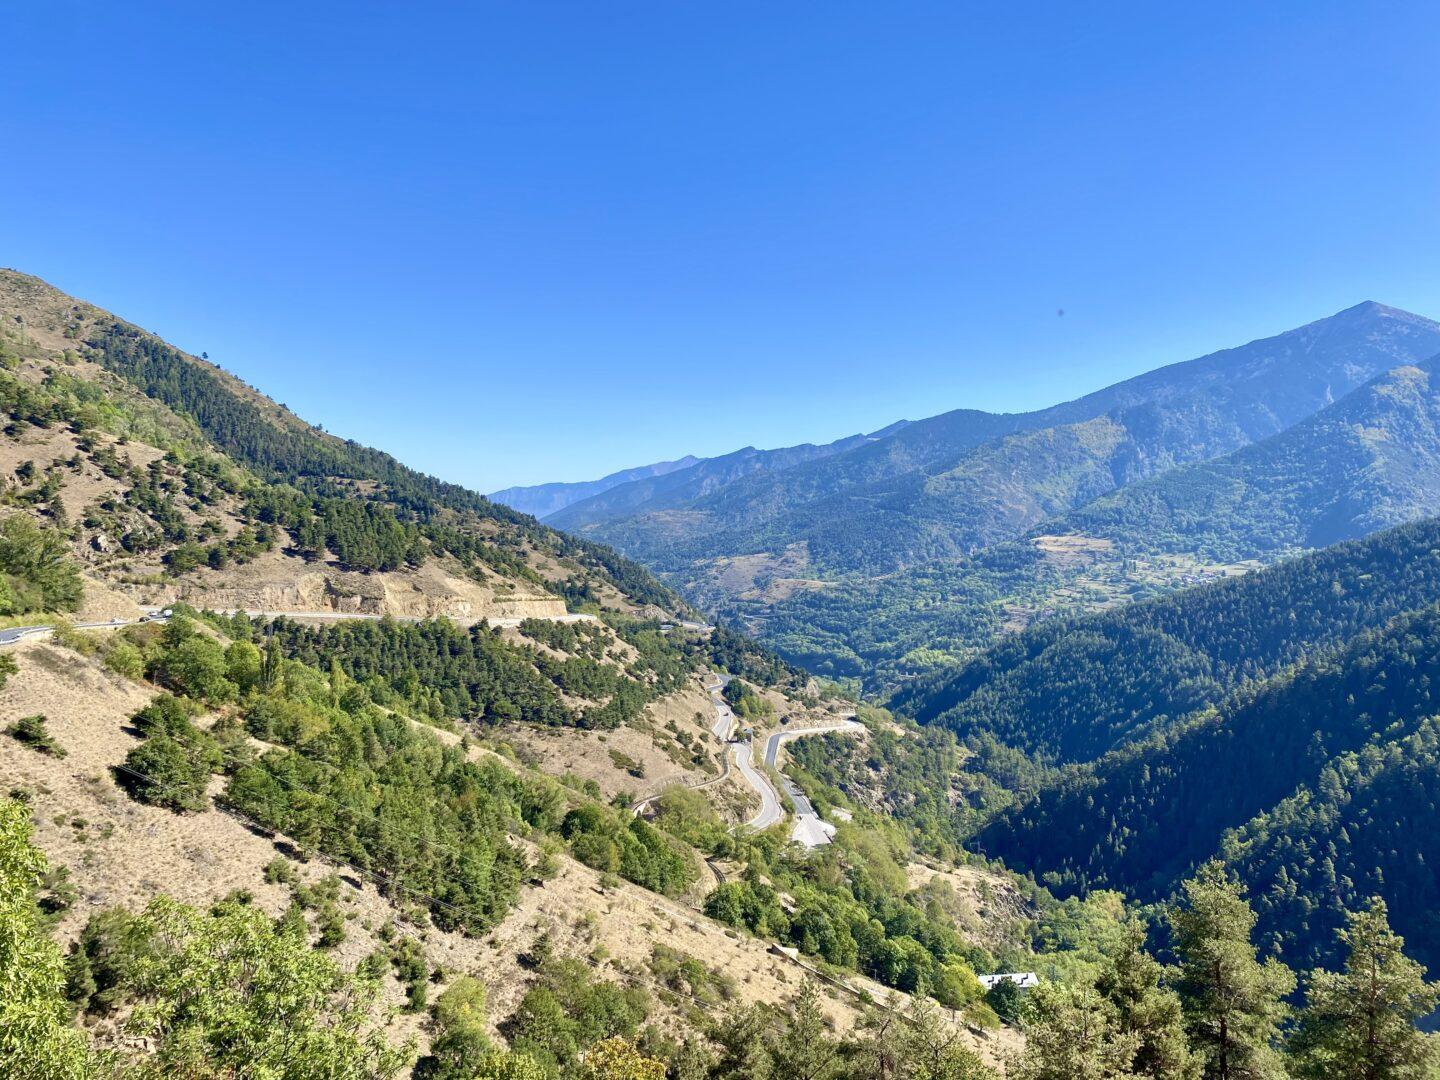 Hiking in the south-east of France. Enchanting nature, Le Puy-en-Velay & other Camino towns and the French Pyrenees.